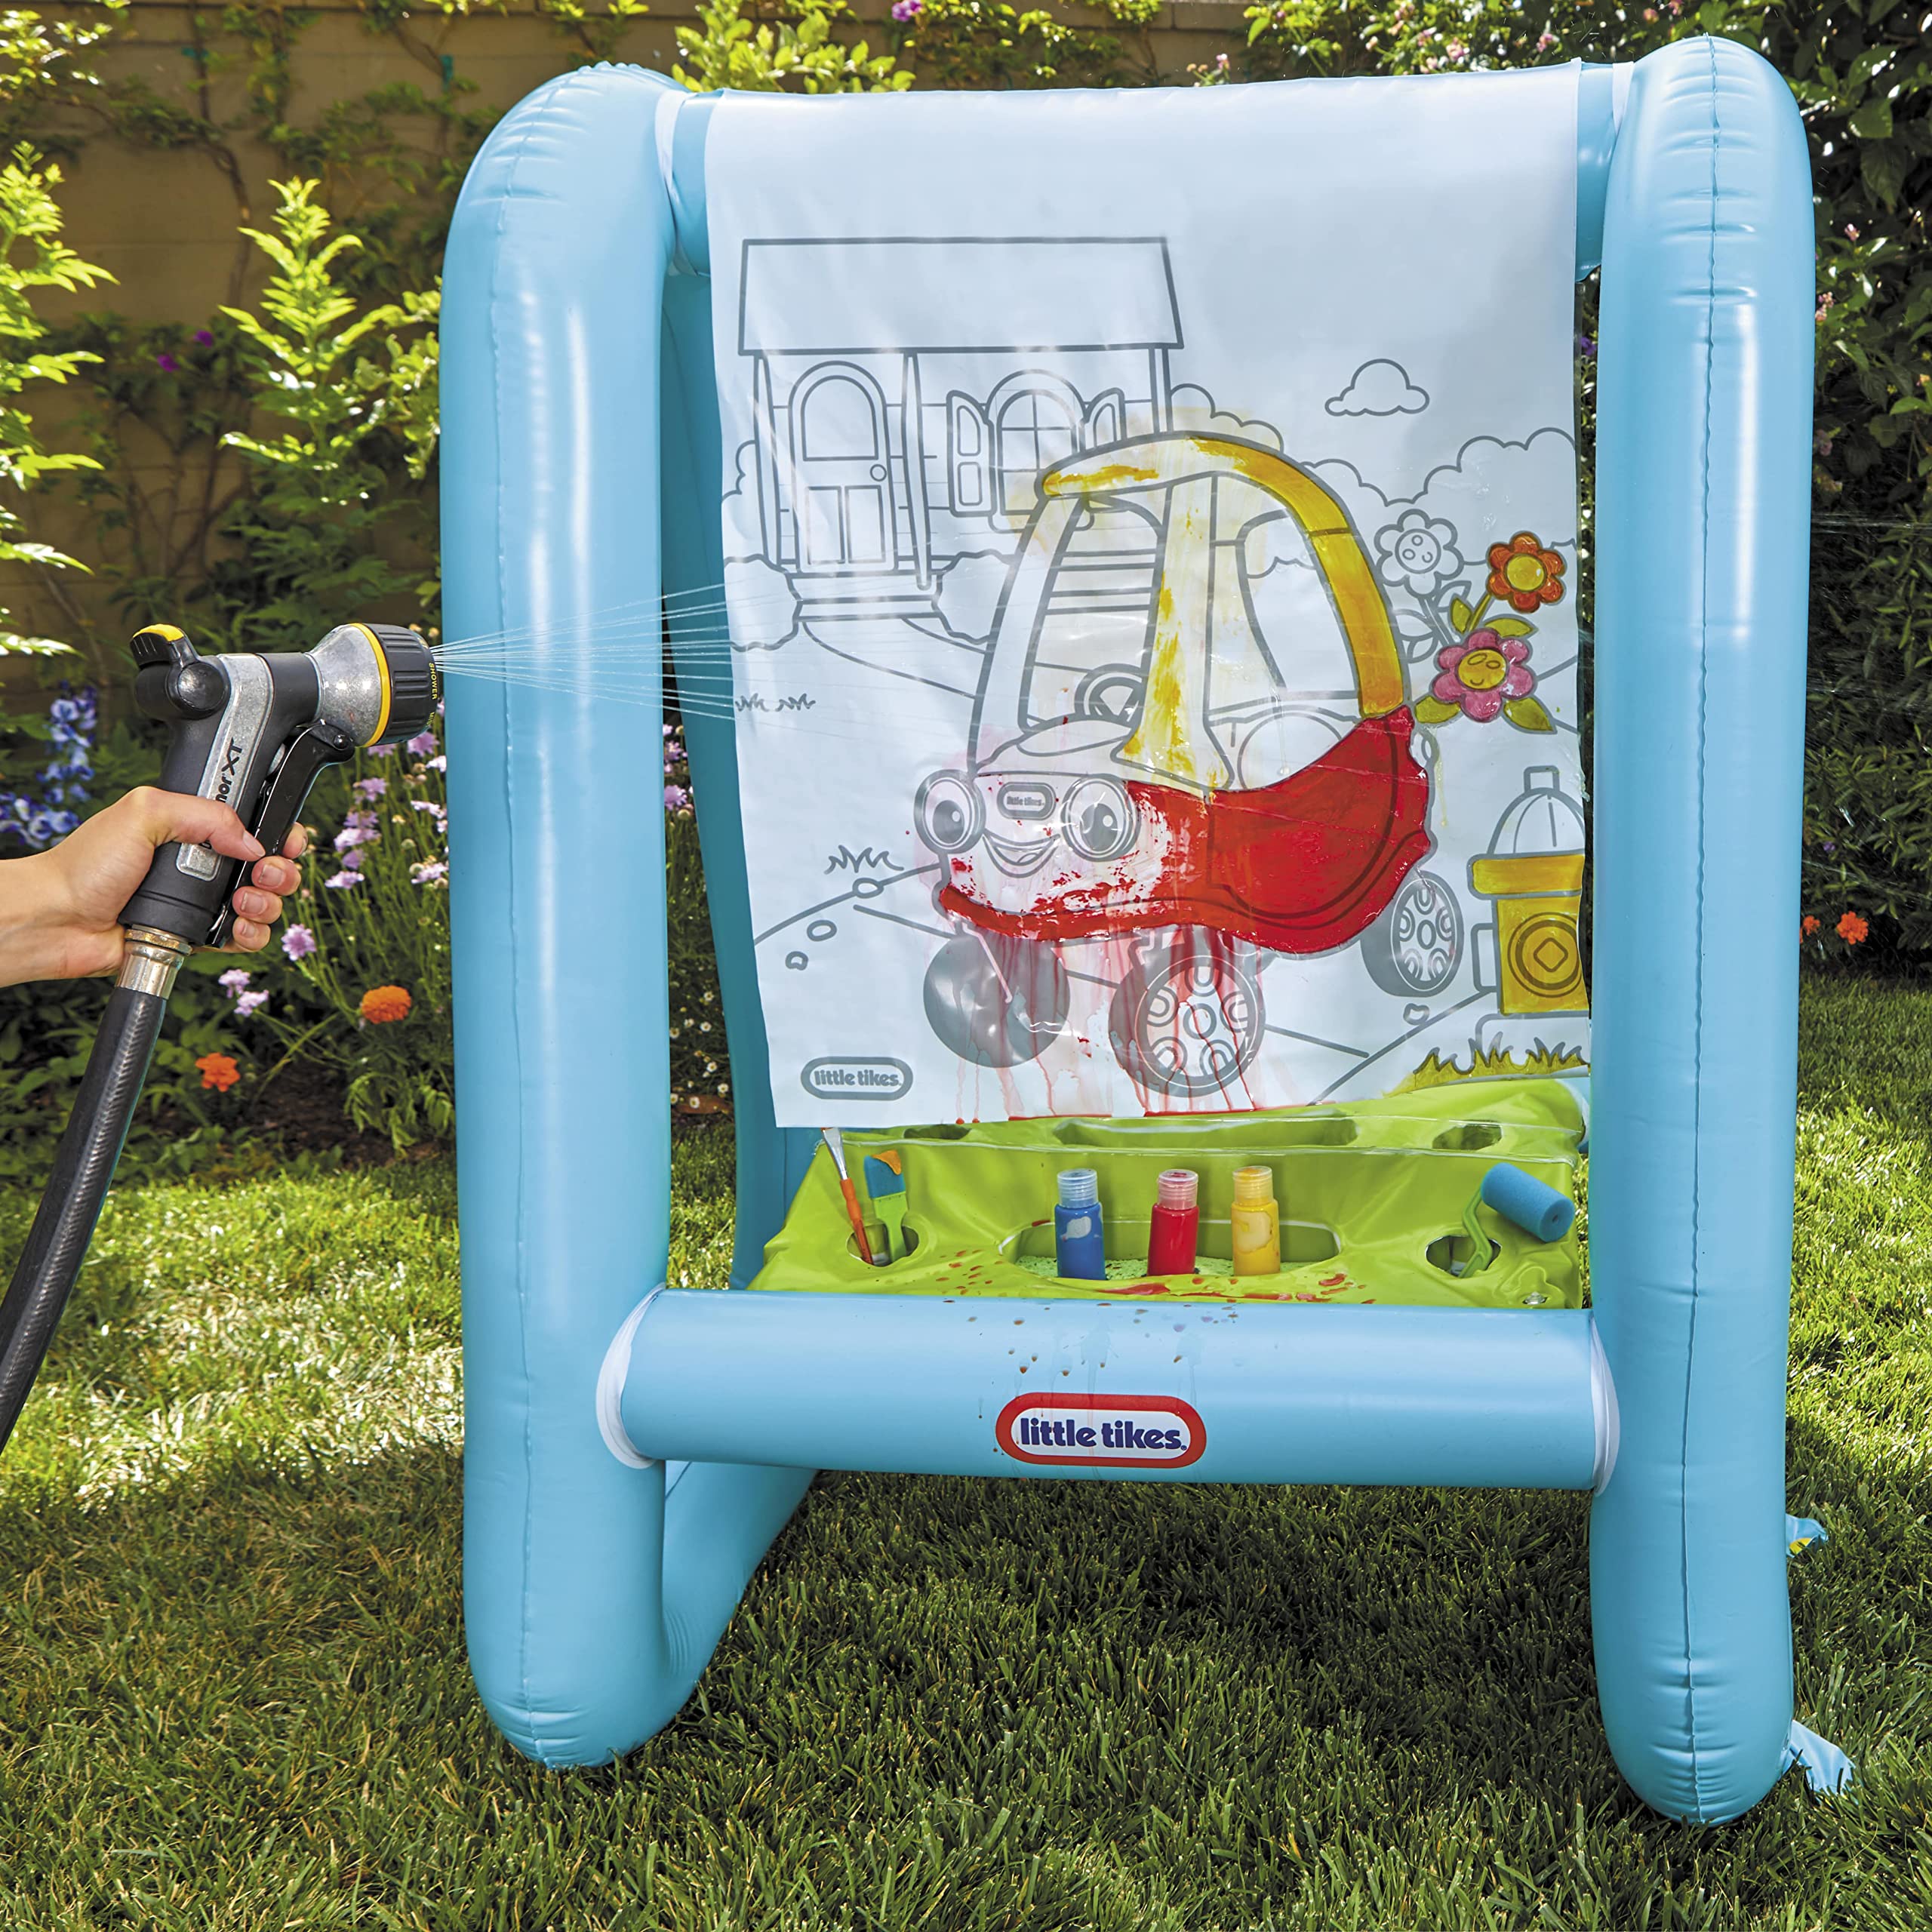 Little Tikes® 3-in-1 Paint & Play Backyard Easel Inflatable Outdoor Art with Accessories for Kids, Children, Boys & Girls 3+ Years